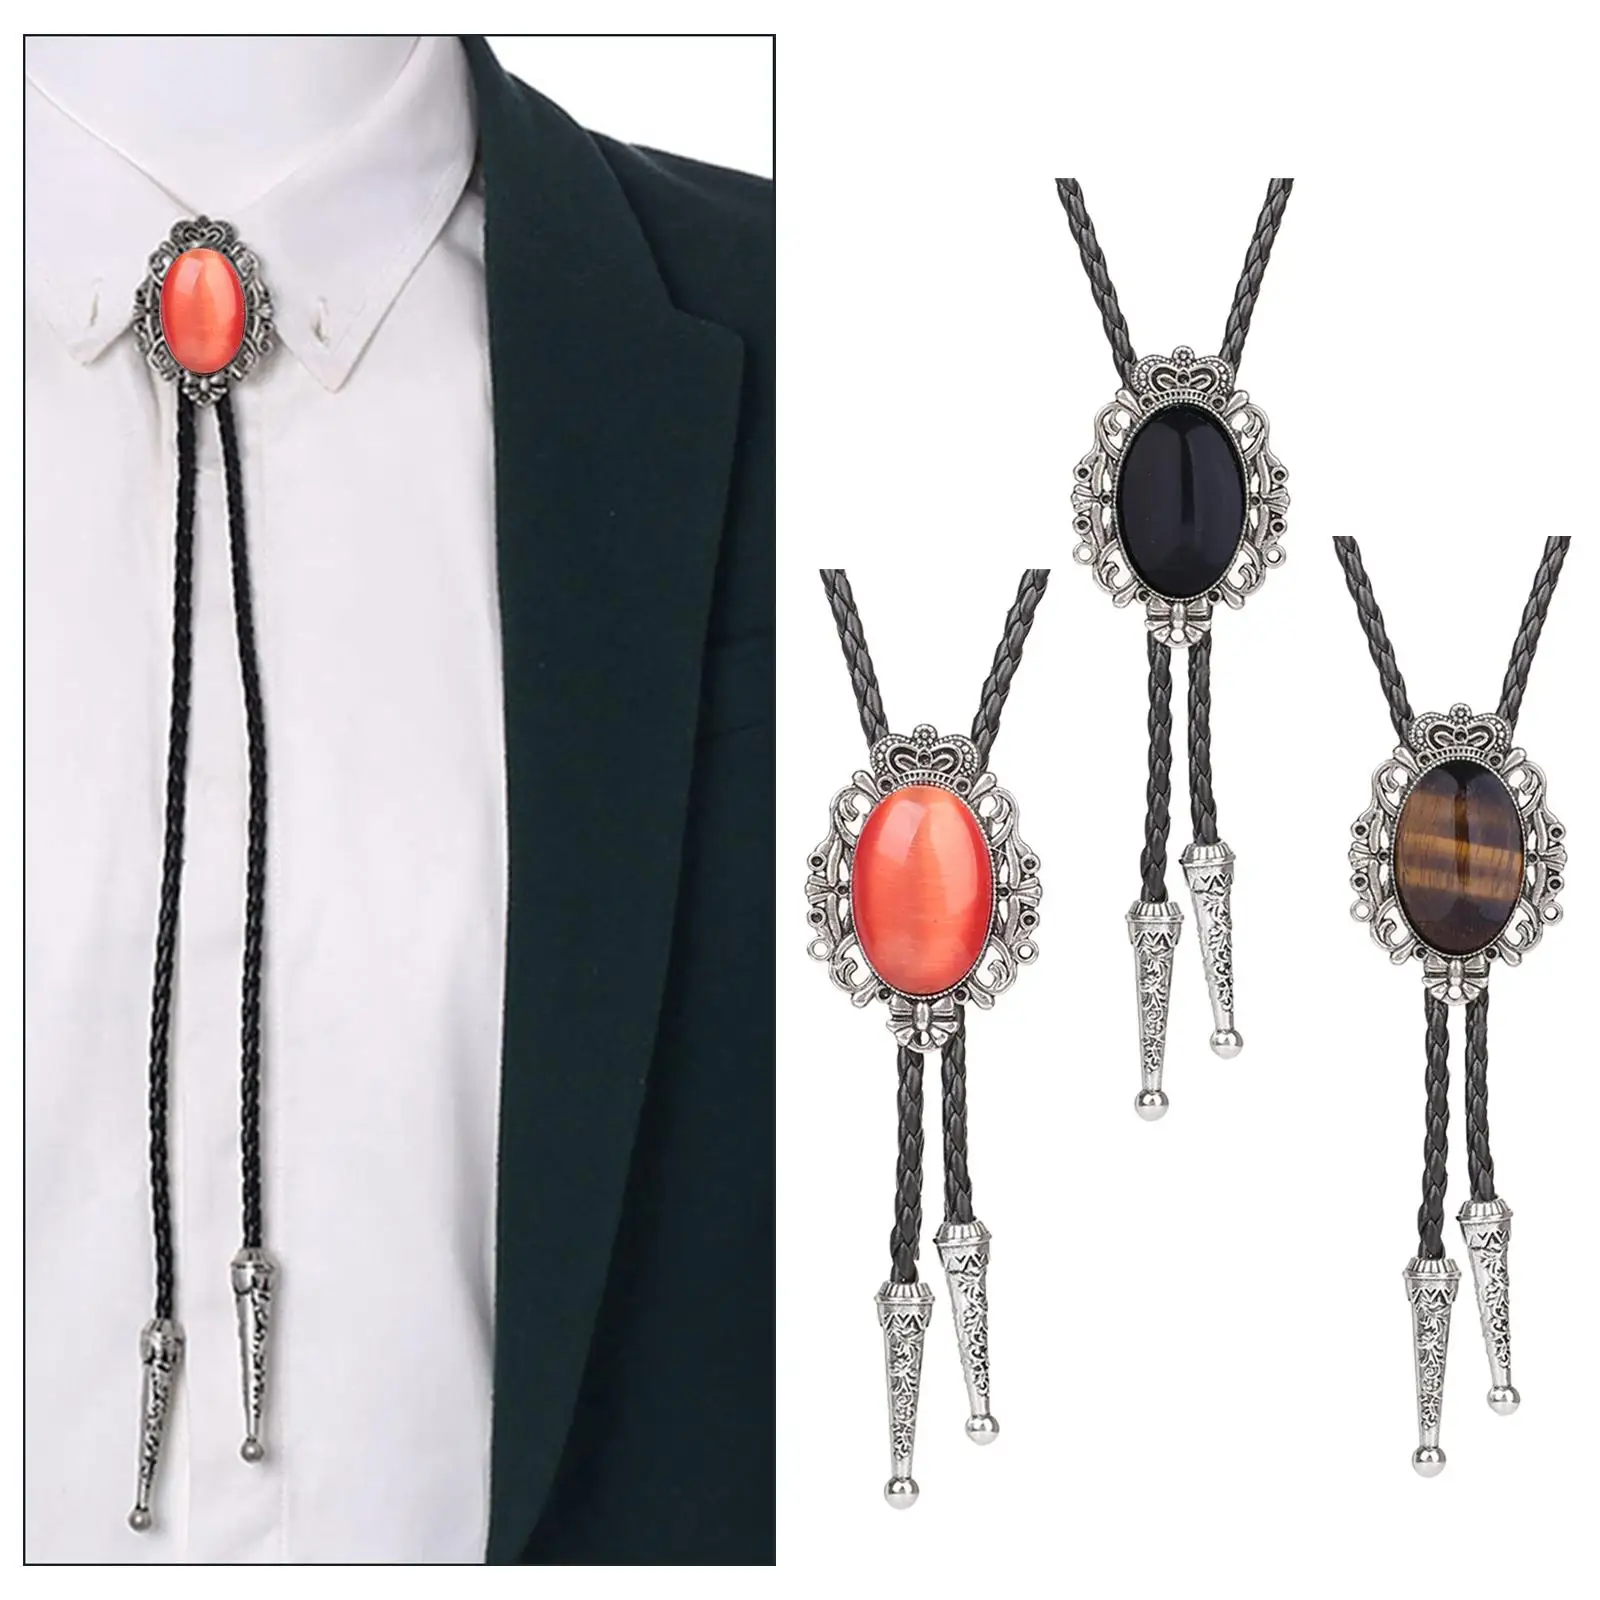  Bolo Tie, Necktie Oval Costume Gift Western  Alloy Adjustable Vintage Rodeo Necklace for Party Christmas Men and Women